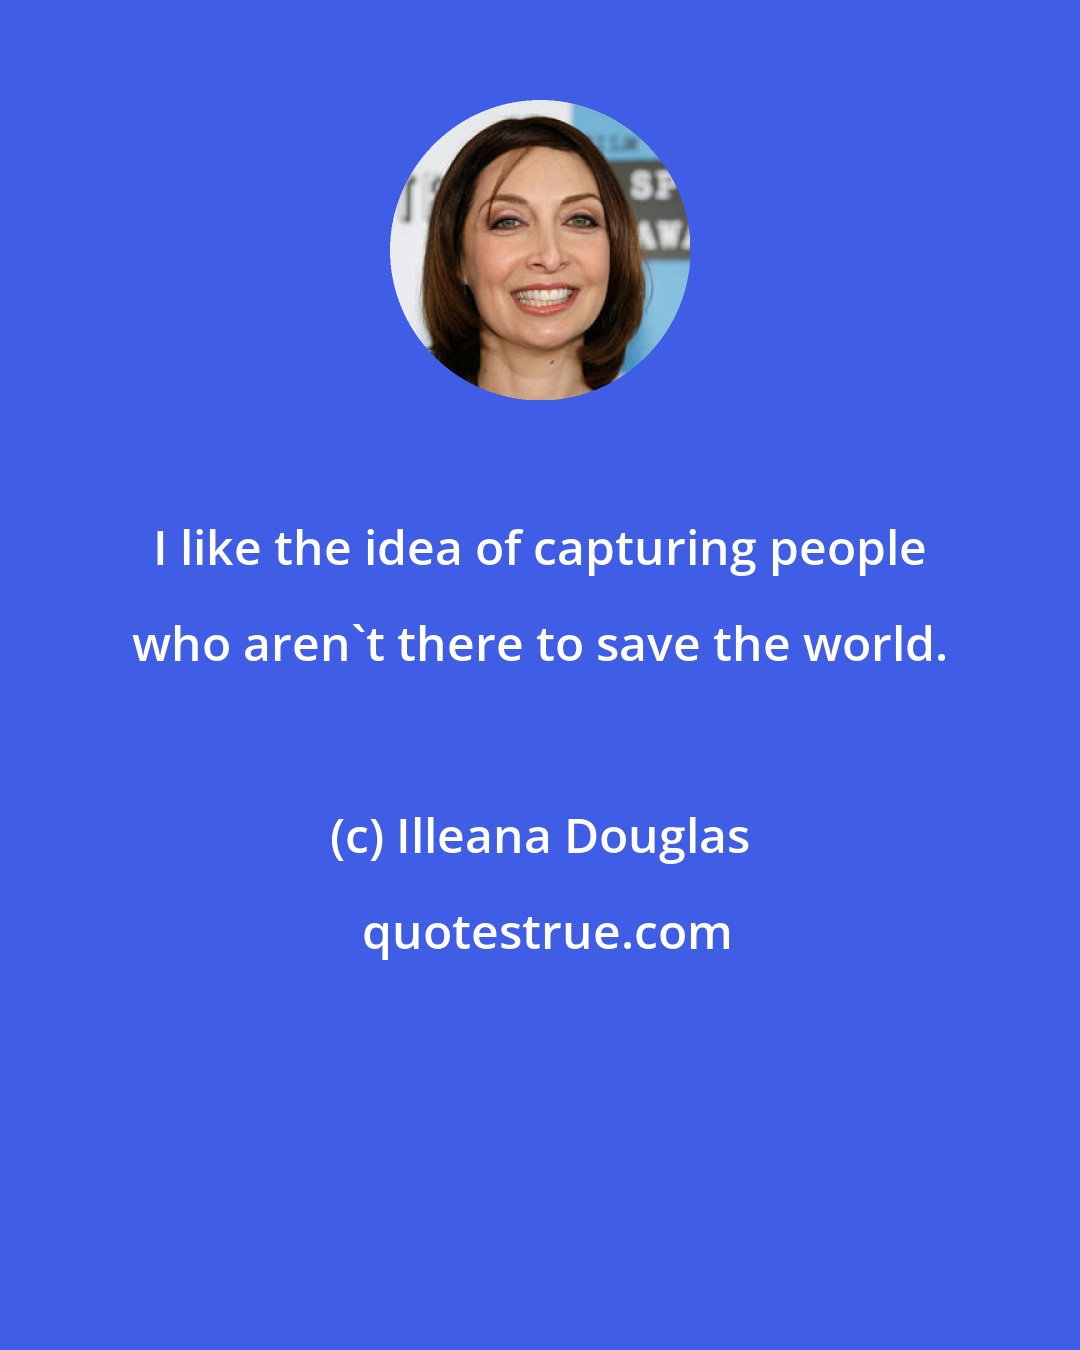 Illeana Douglas: I like the idea of capturing people who aren't there to save the world.